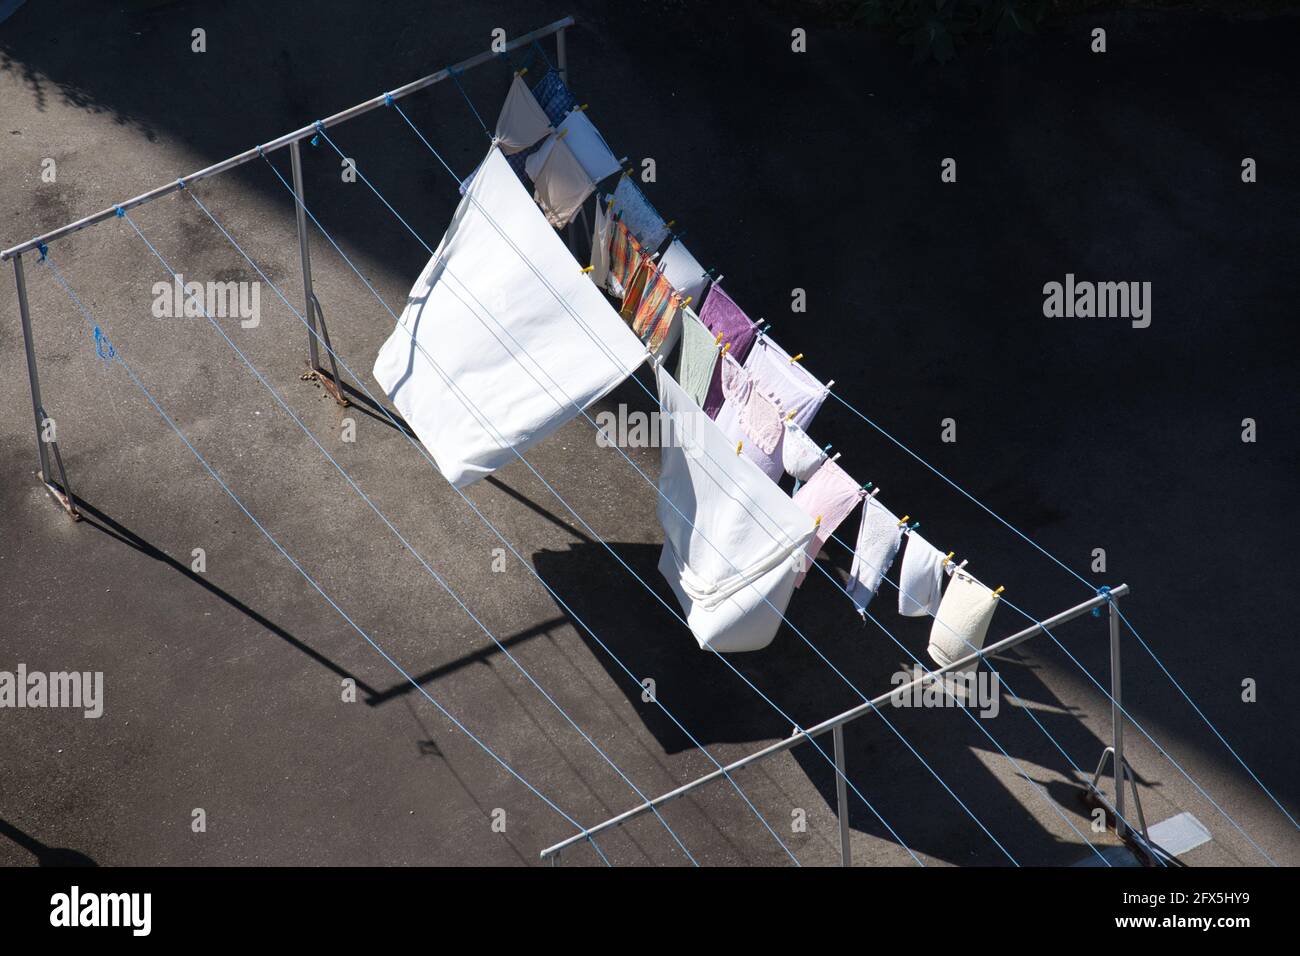 Washing hanging on a clothes line in Australia Stock Photo